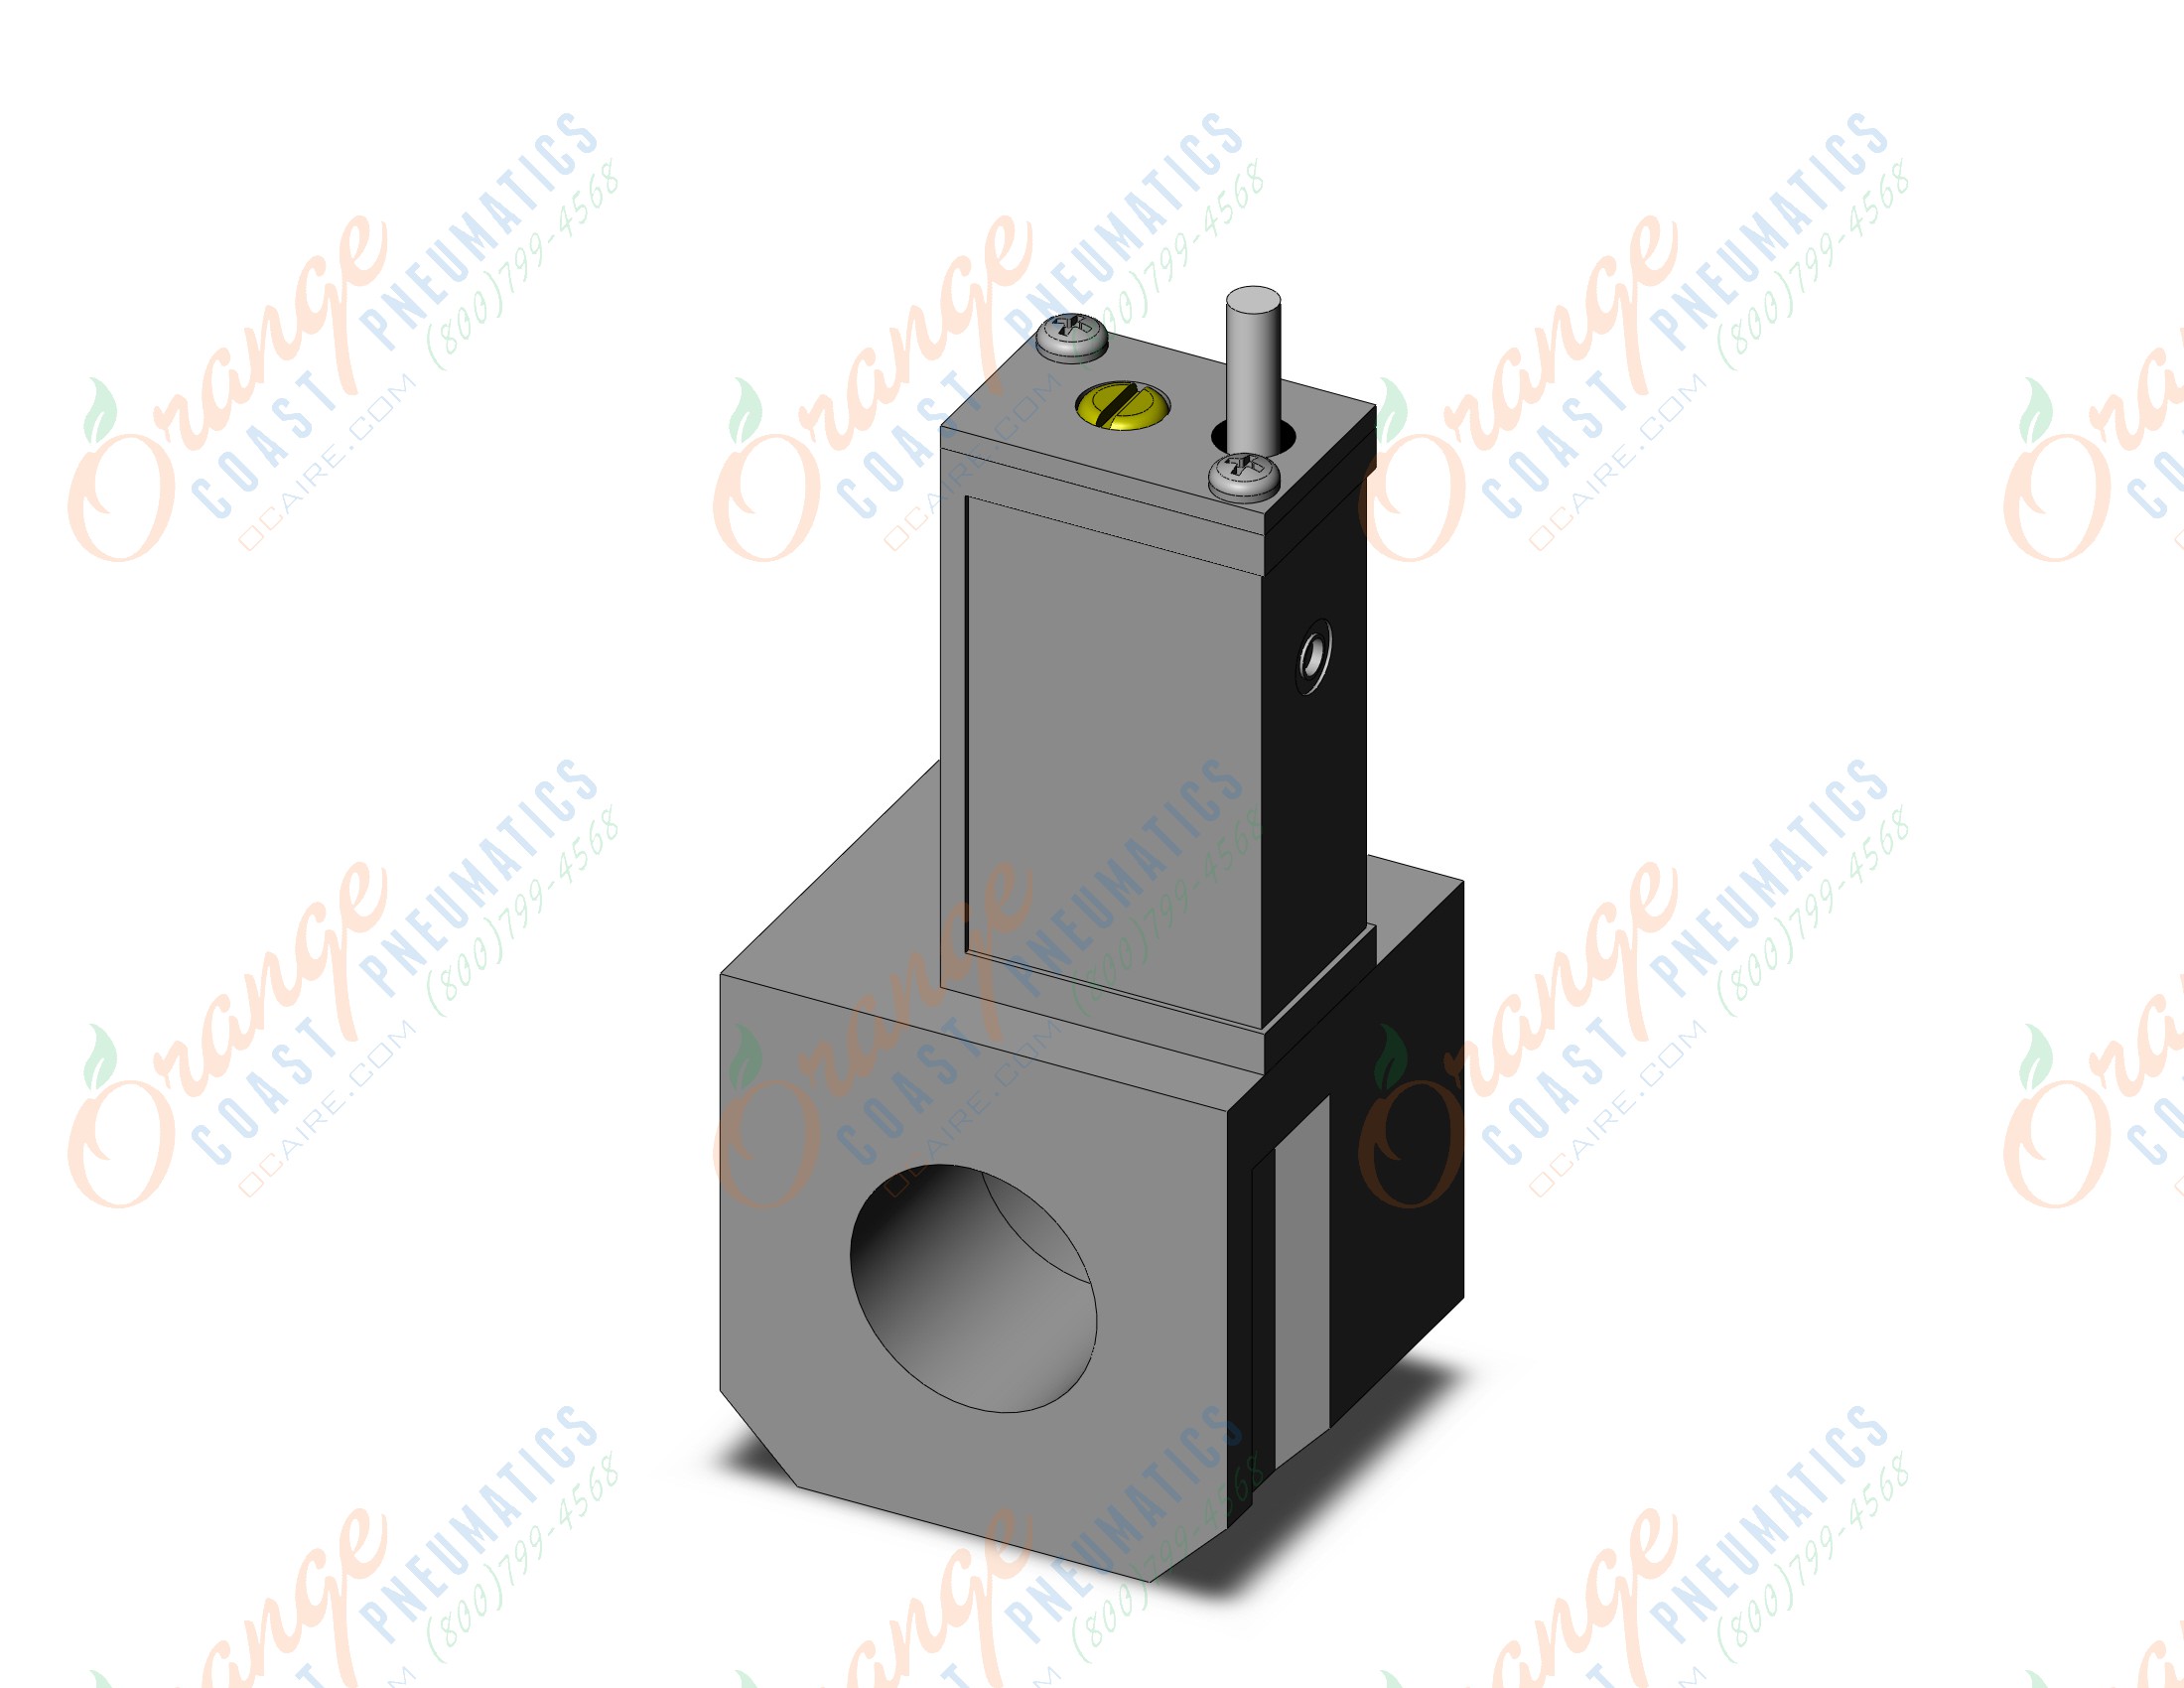 SMC IS10E-4004-R-A pressure switch w/piping adapter, PRESSURE SWITCH, IS ISG